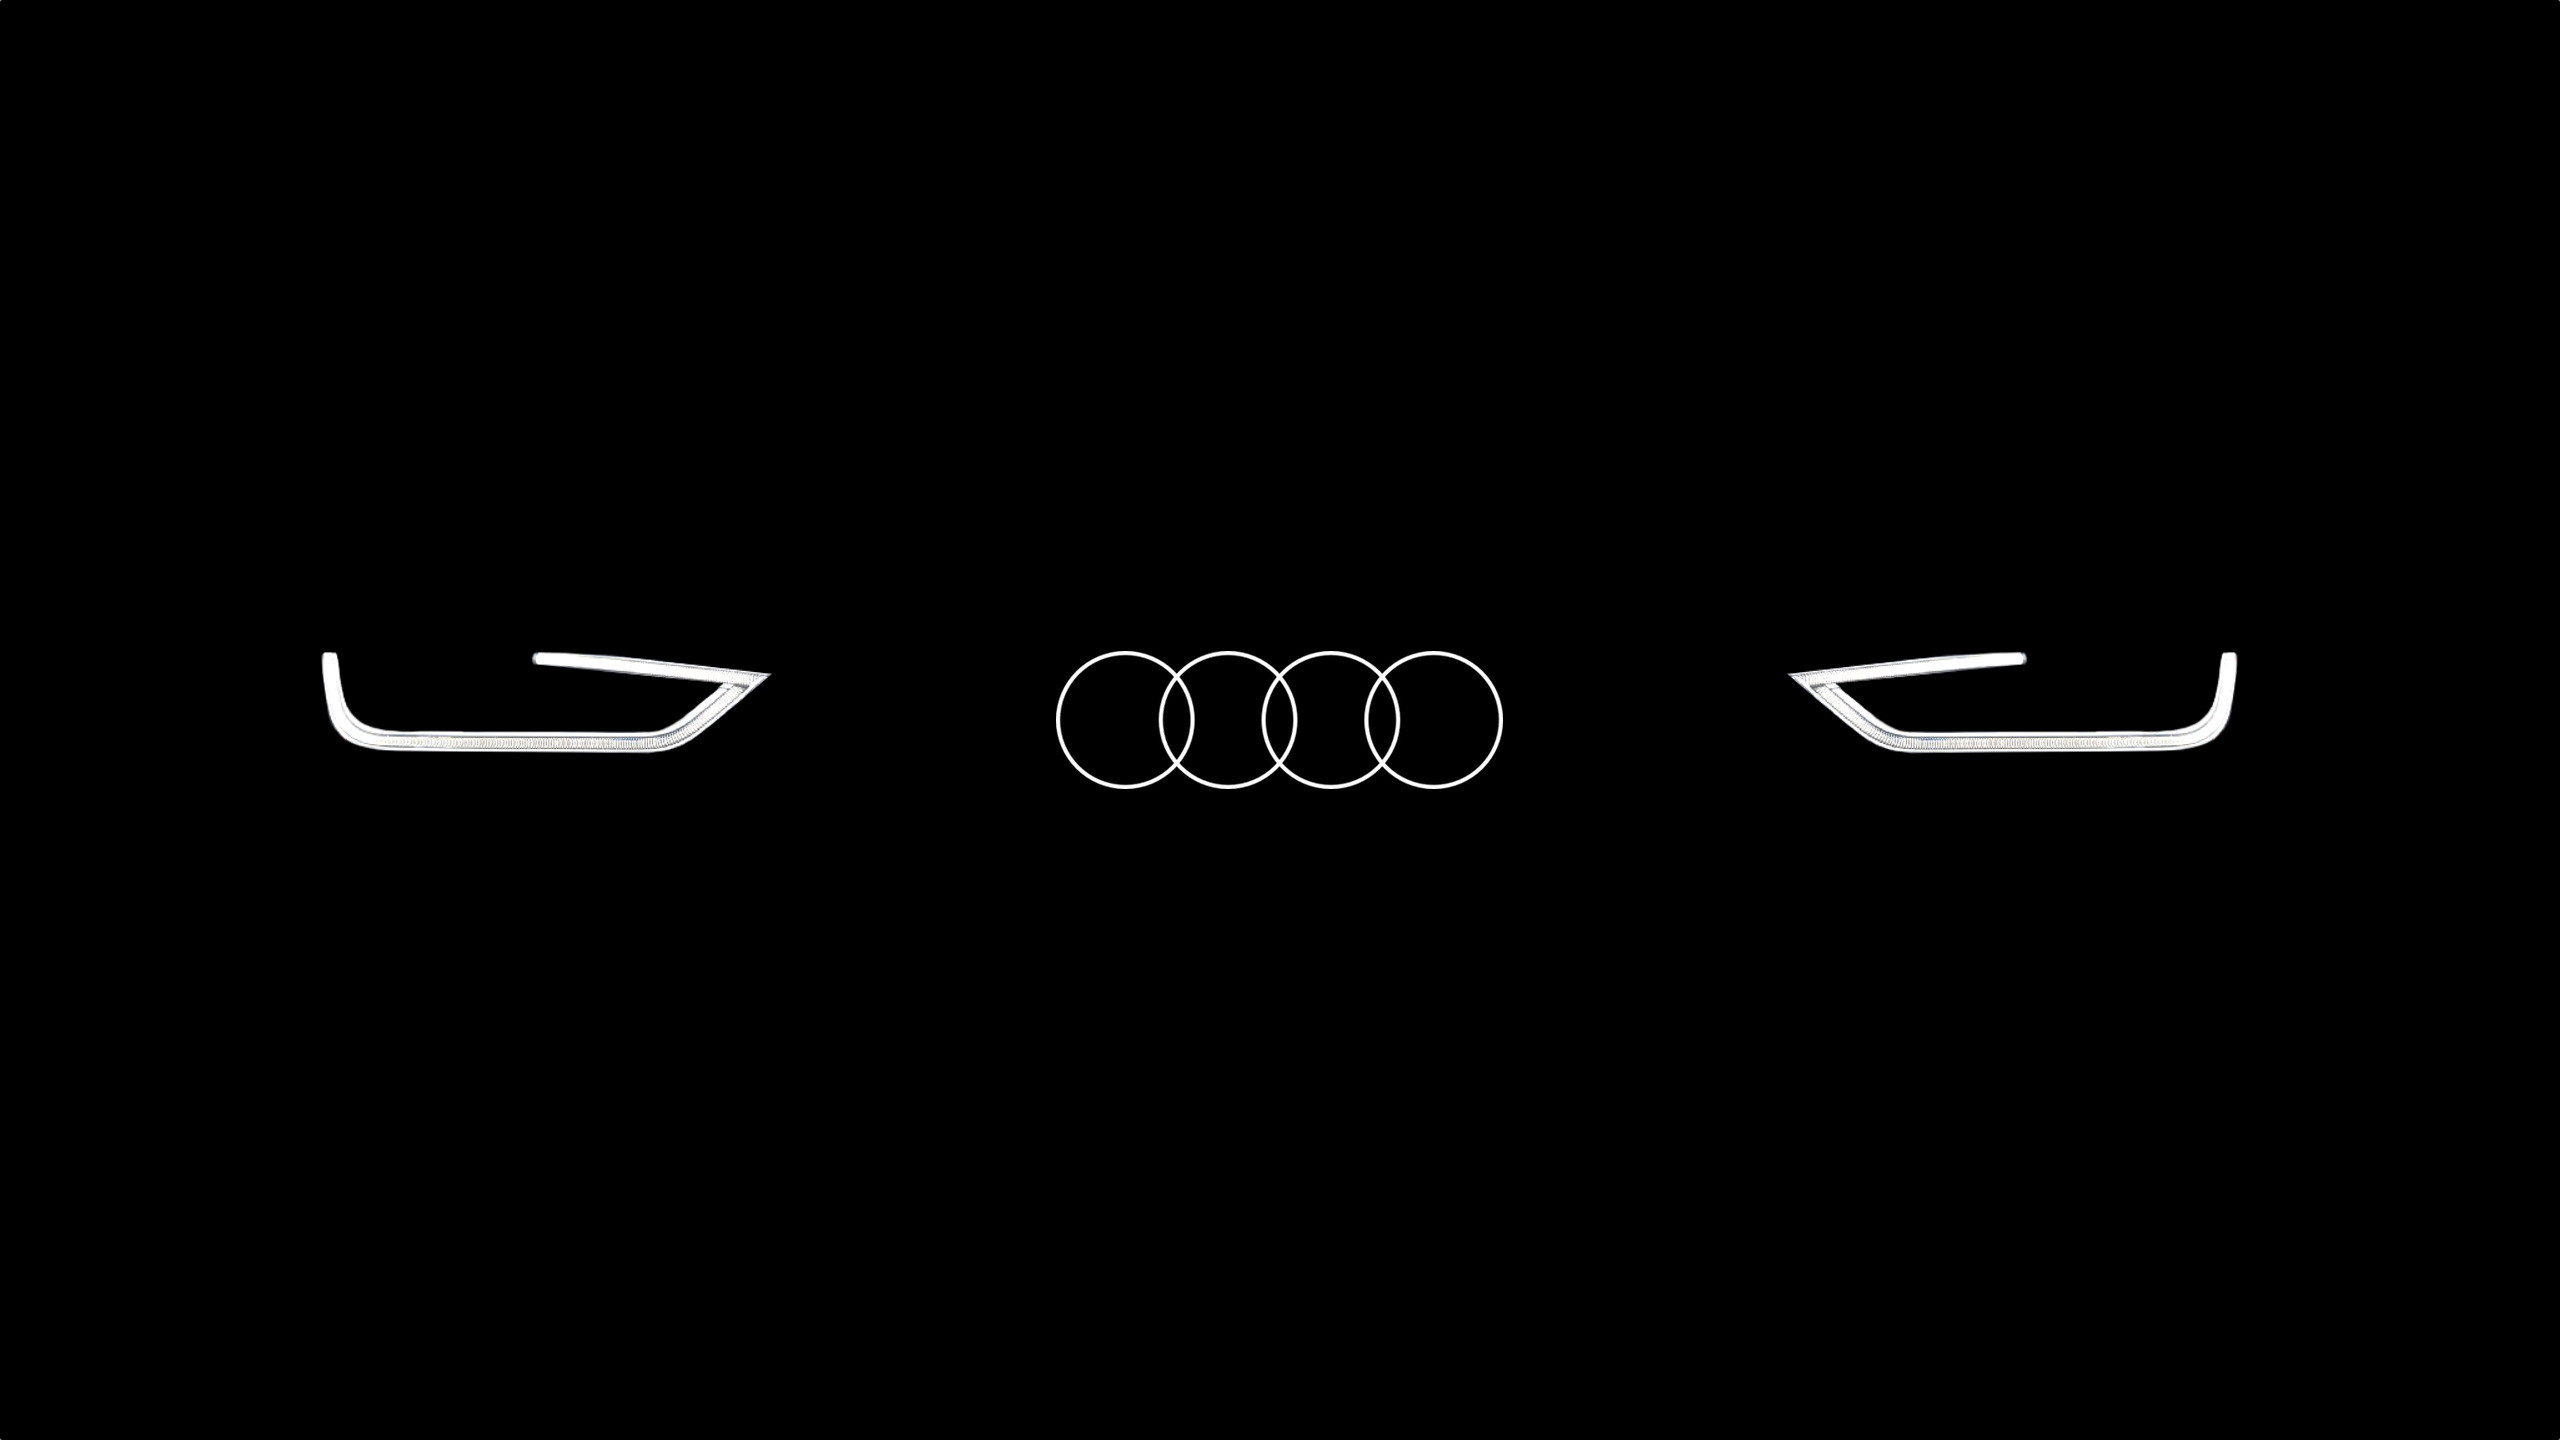 2560x1440 Audi Wallpaper Group with 73 items